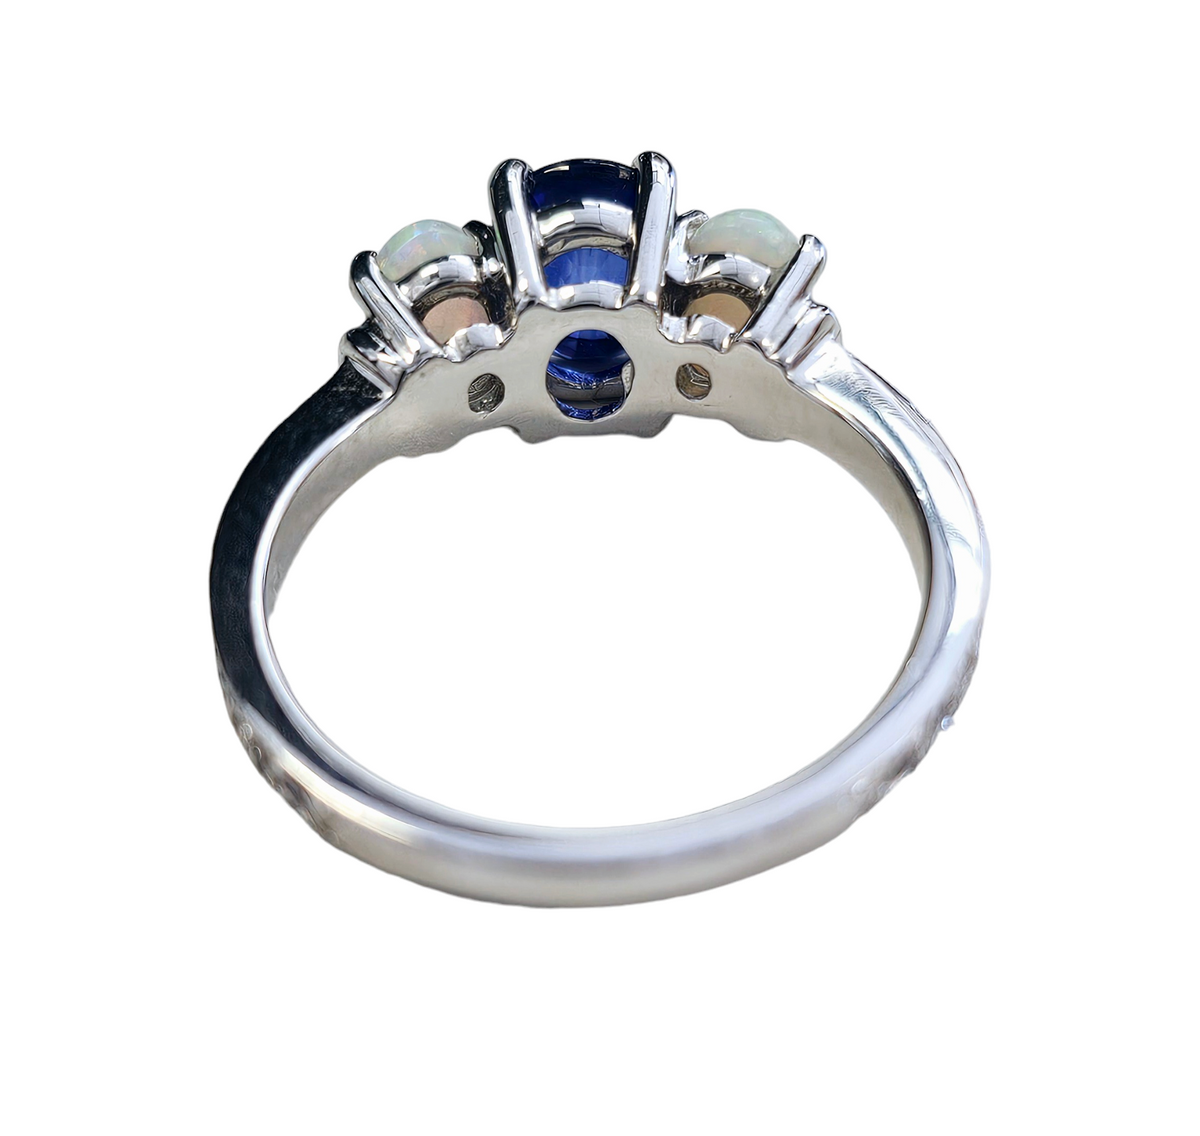 Oval Blue Sapphire and Oval Cabochon Opal Diamond Ring made in 14-Karat White Gold